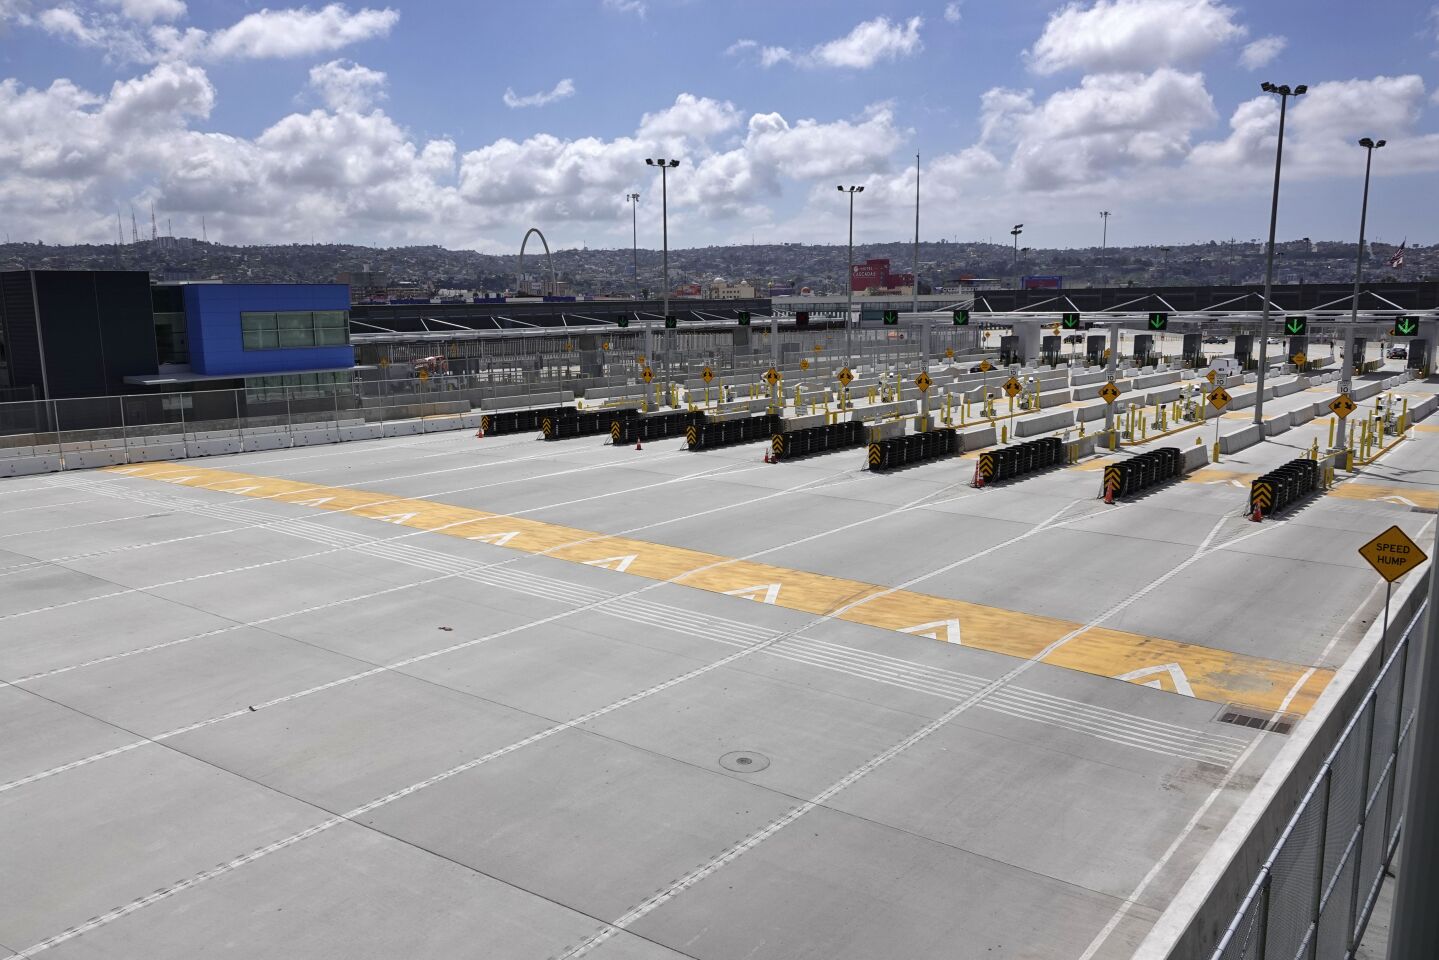 The southbound San Ysidro Port of Entry for vehicles, one of the busiest in the world, had light traffic on March 29, 2020.